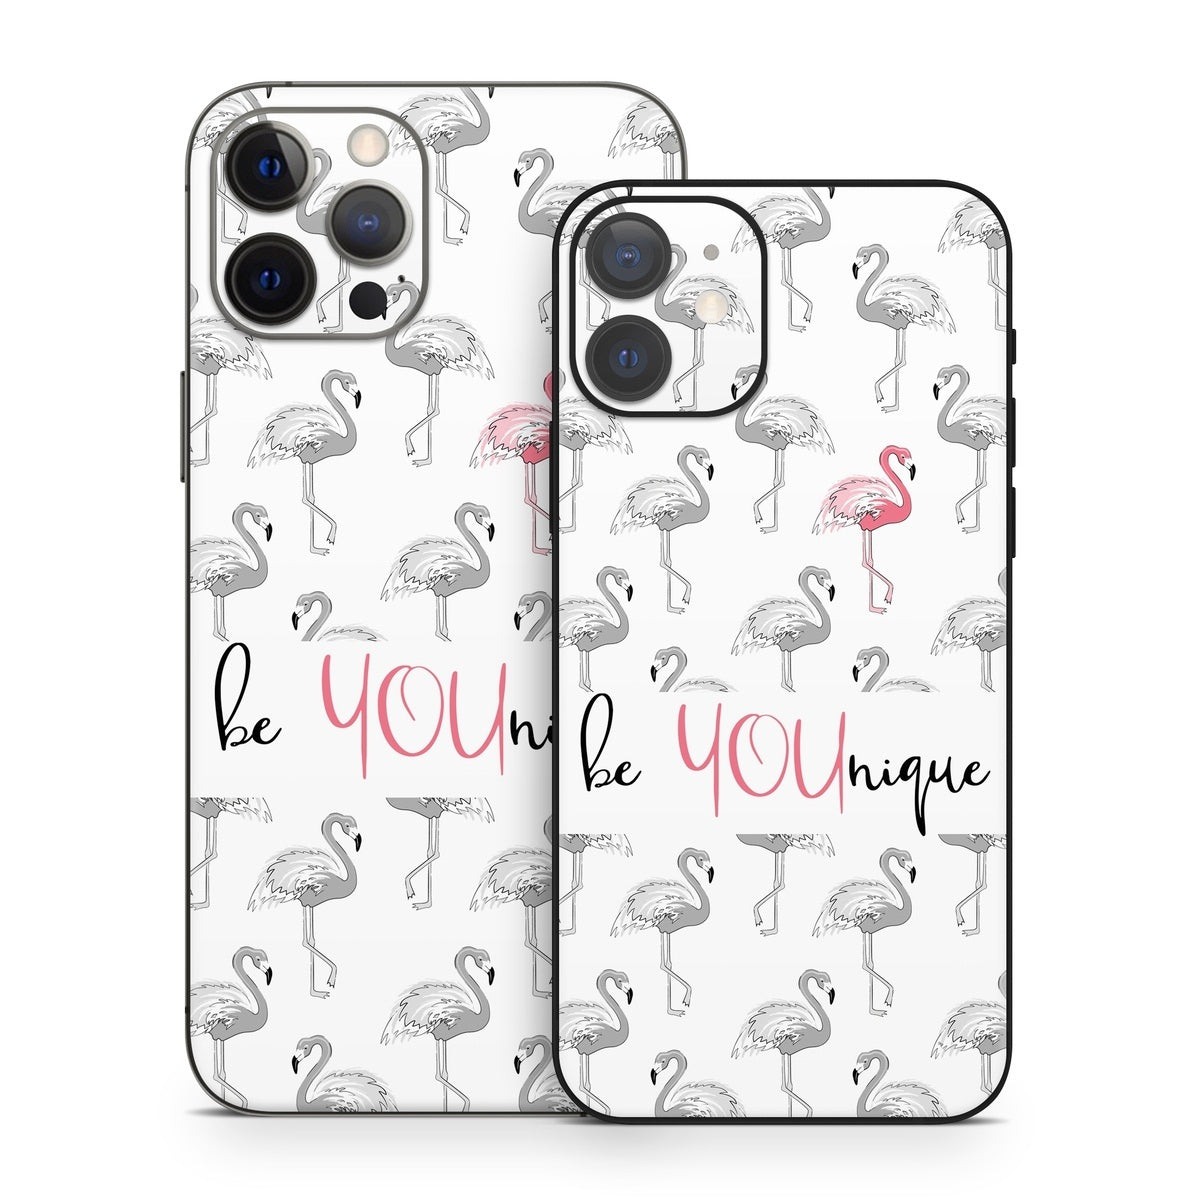 Younique - Apple iPhone 12 Skin